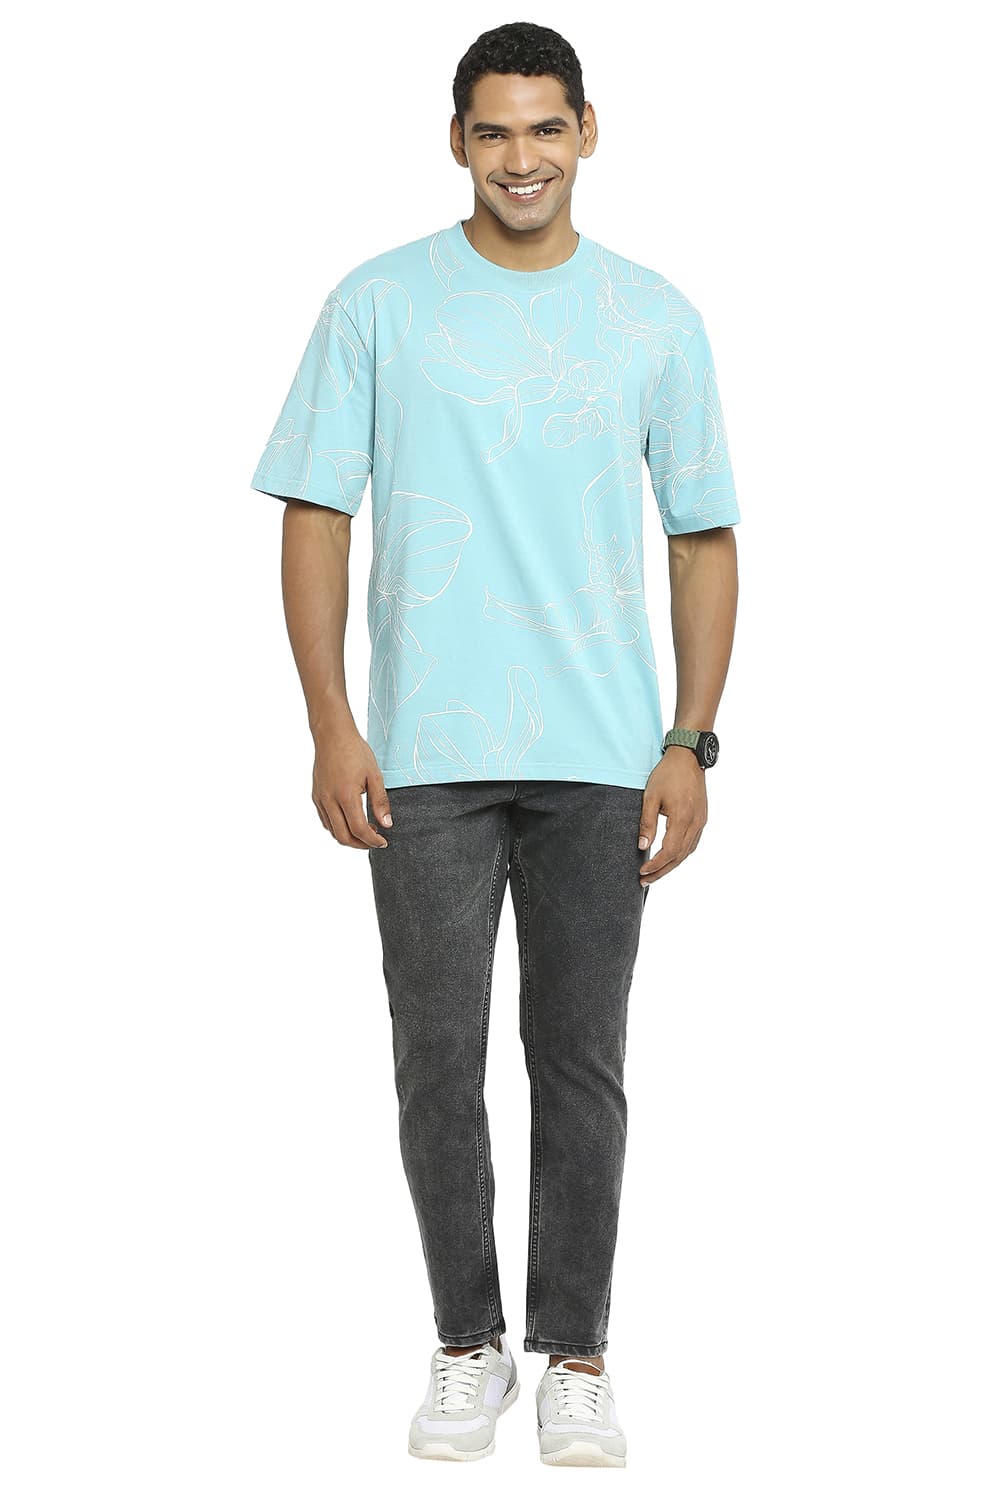 BASICS RELAXED FIT PRINTED CREW T-SHIRT